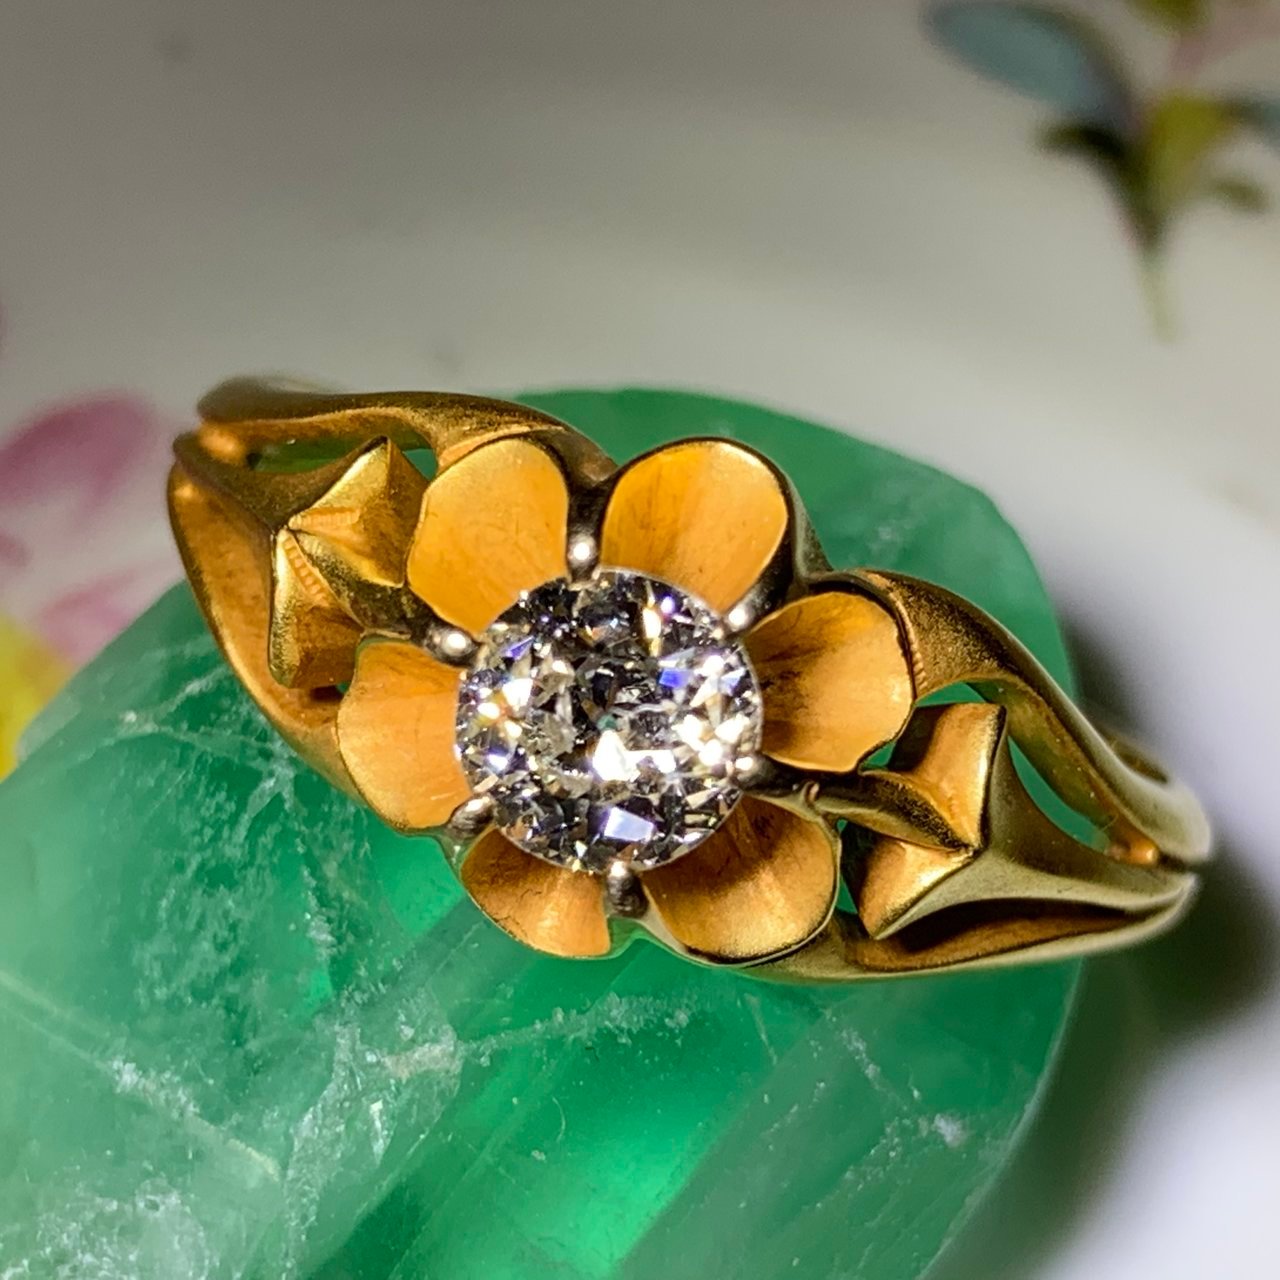 PreRaphaelite posted this beautiful buttercup set diamond ring on the Show Me the Bling forum at PriceScope. Buttercup settings really are a lovely way to make the stone the star! This OEC looks phenomenal seated inside the golden flower!